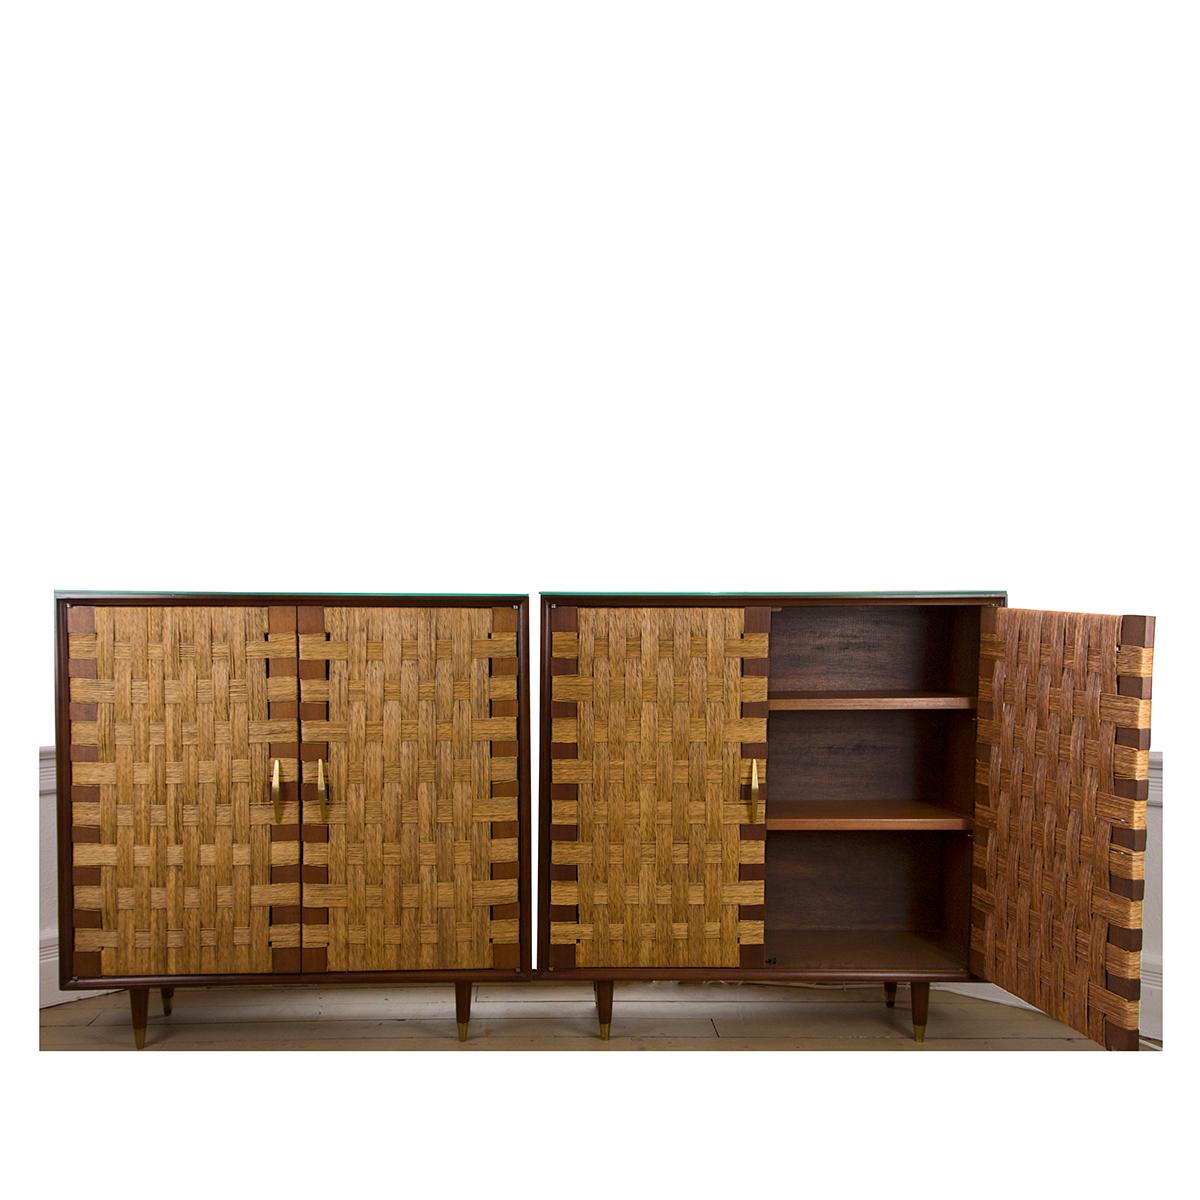 Pair of maple and woven cane cabinets with interior shelves and brass details and
glass tops, by Edmund Spence.